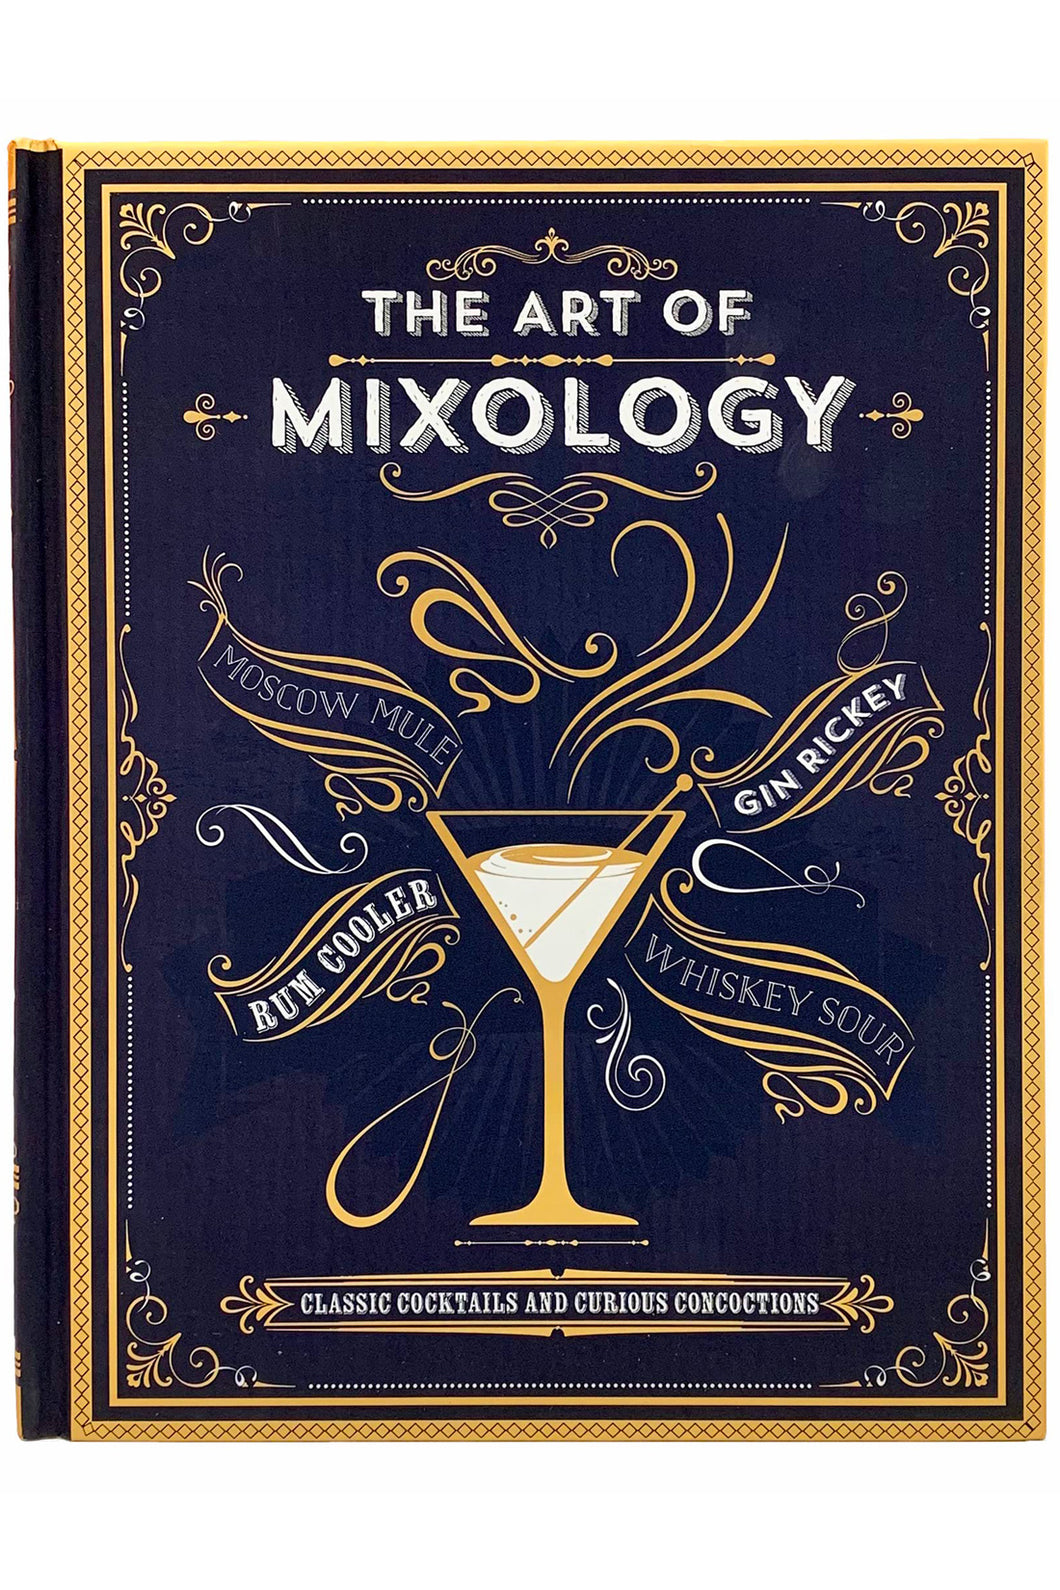 The Art of Mixology: Classic Cocktails and Curious Concoctions by Parragon Books / Hardcover - NEW BOOK OR BOOK BOX